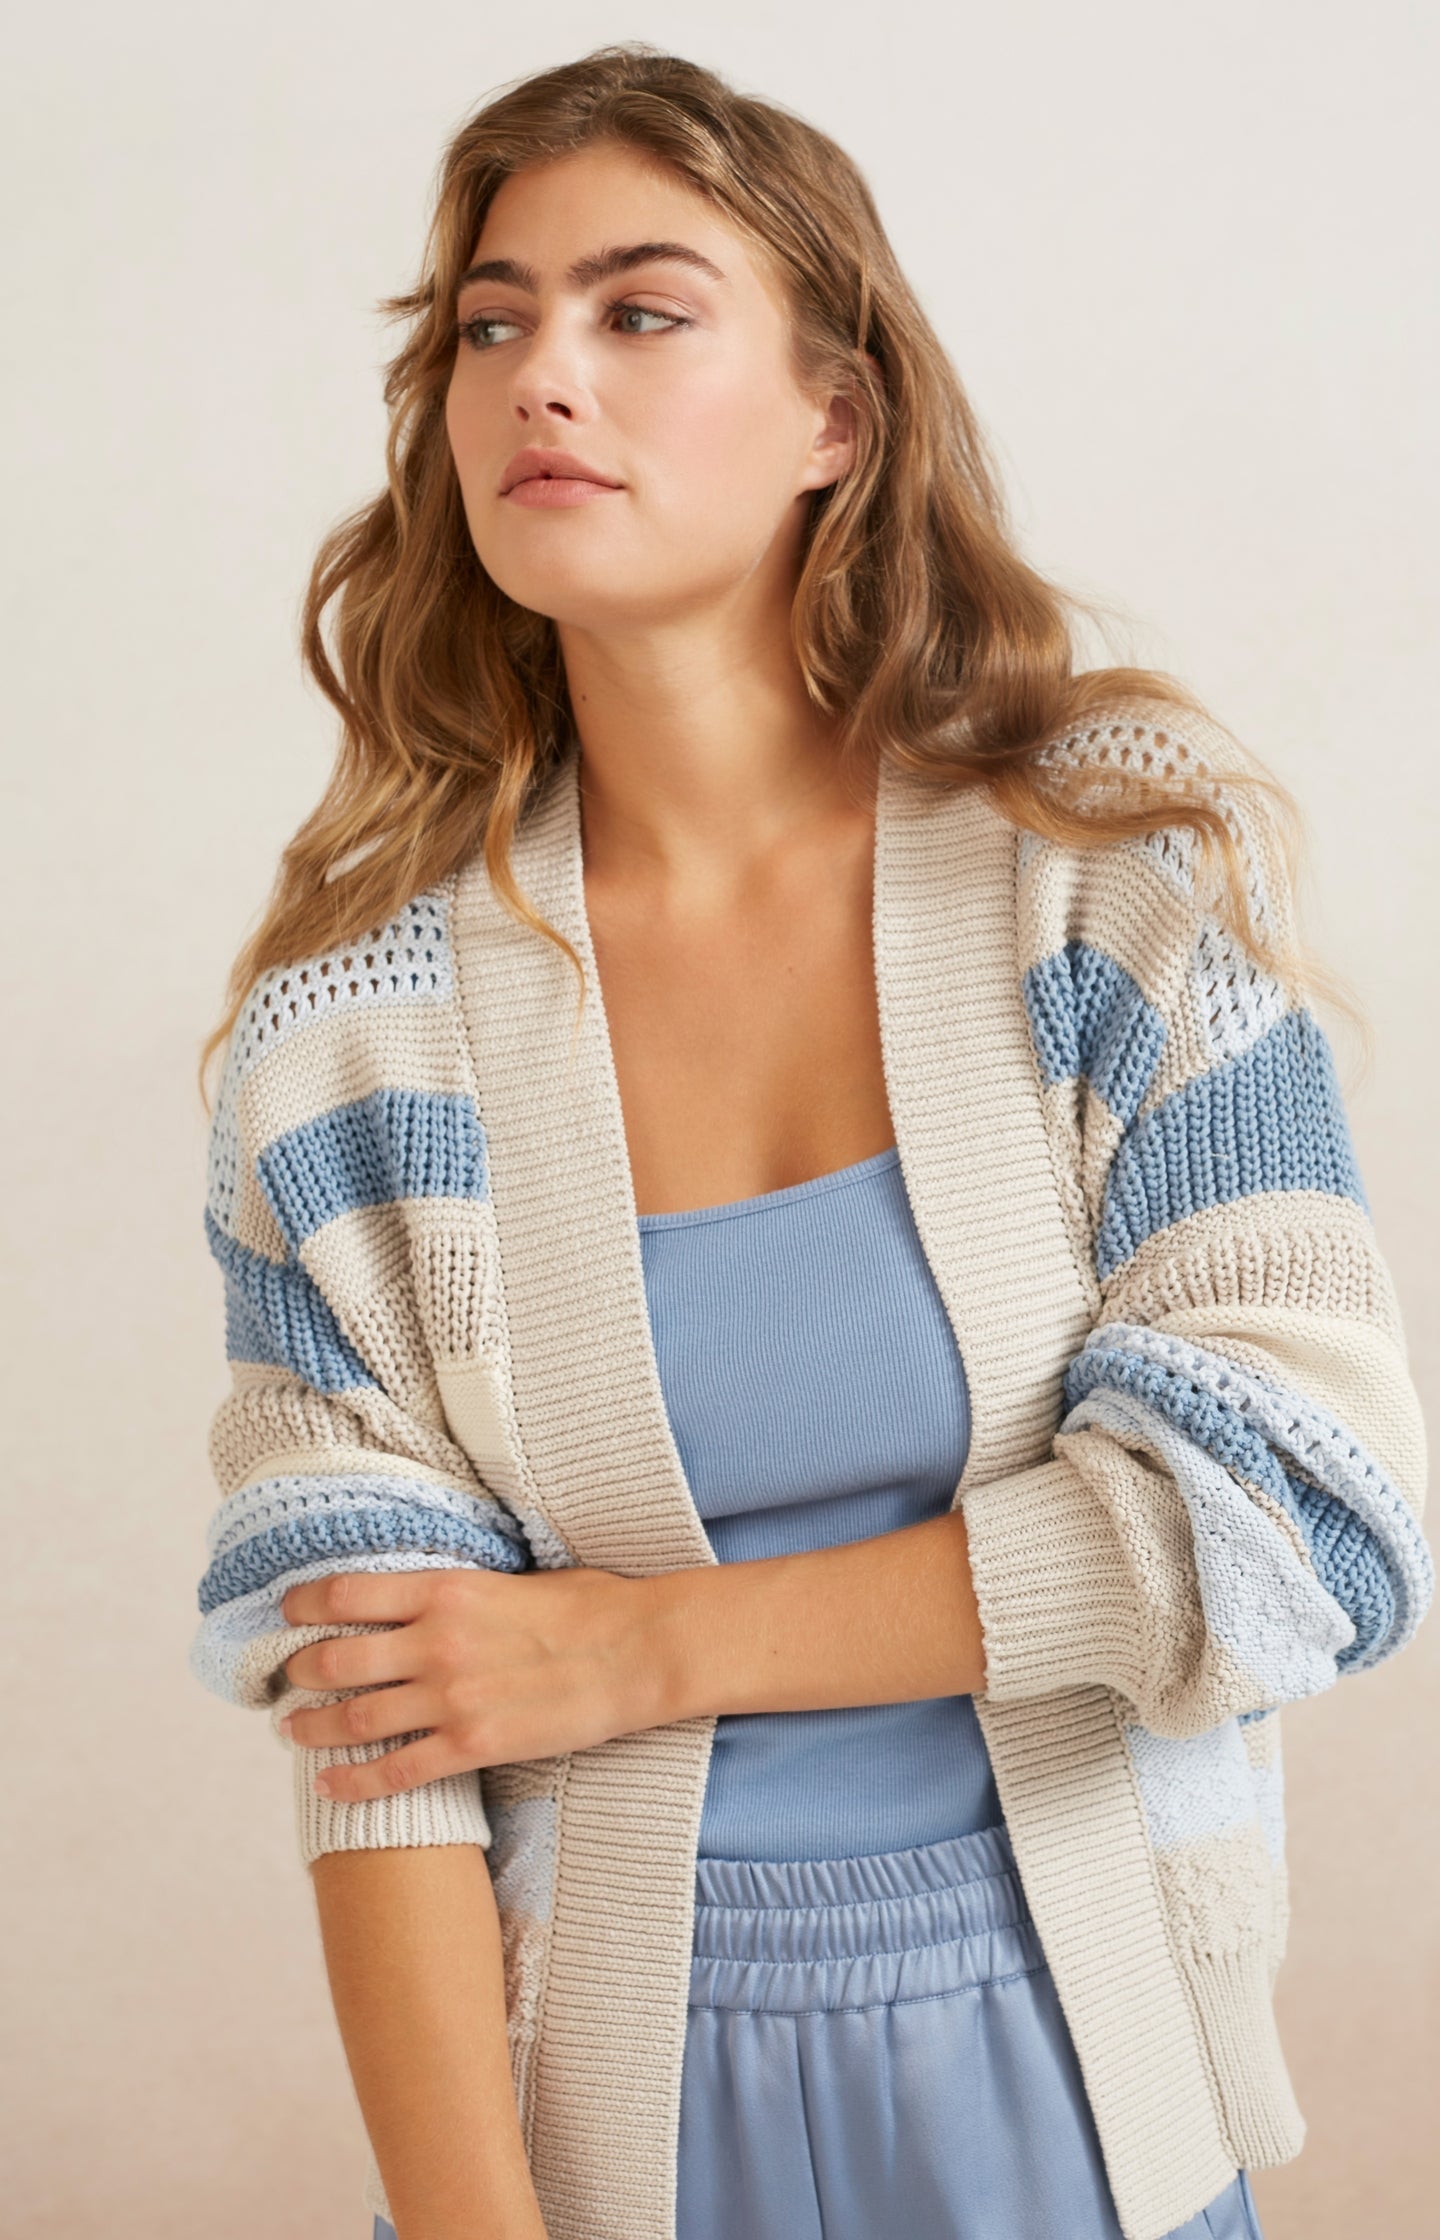 Textured cardigan with long sleeves and knitted stripes - Type: lookbook